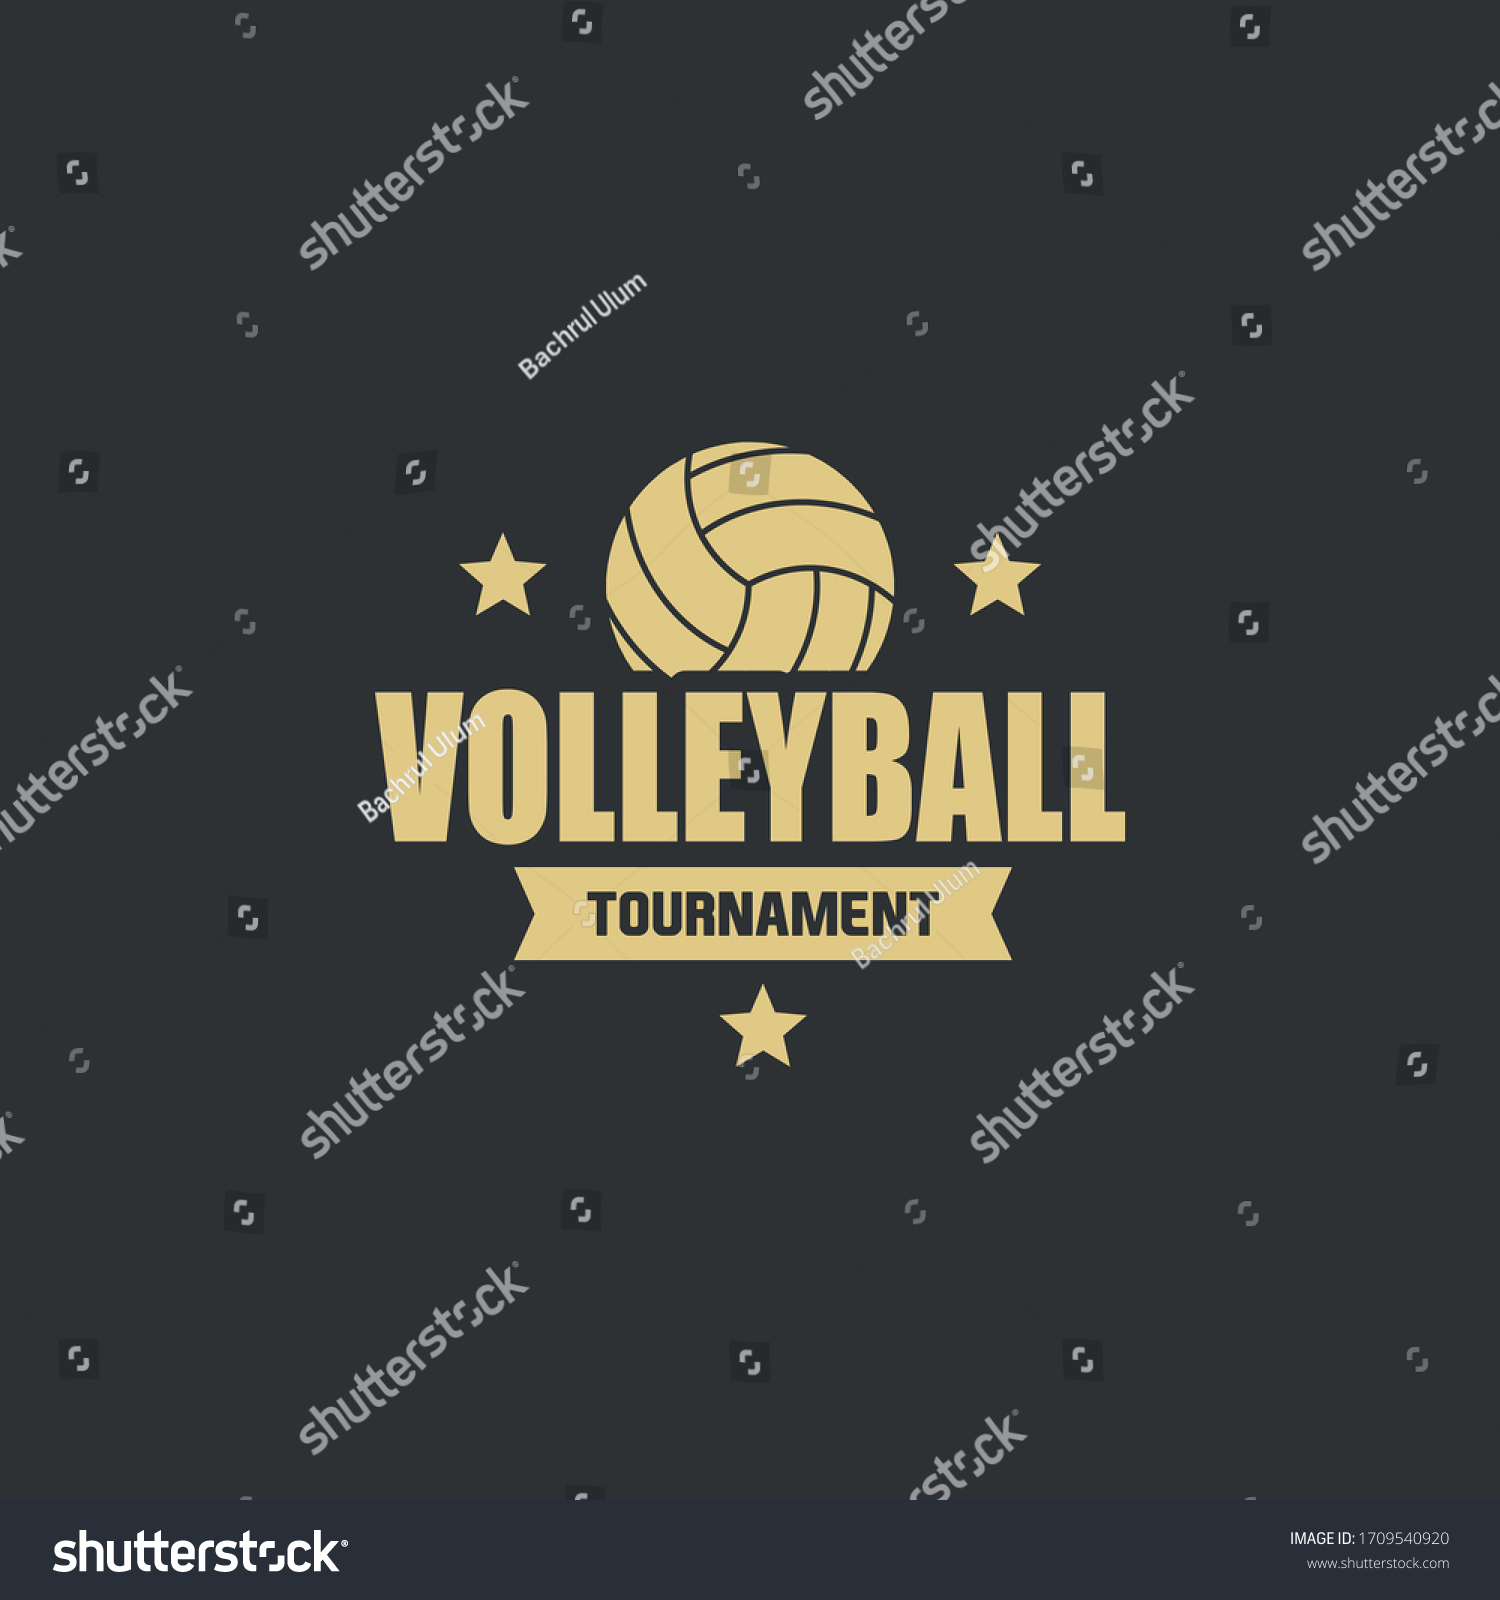 3,308 Volleyball retro Images, Stock Photos & Vectors | Shutterstock